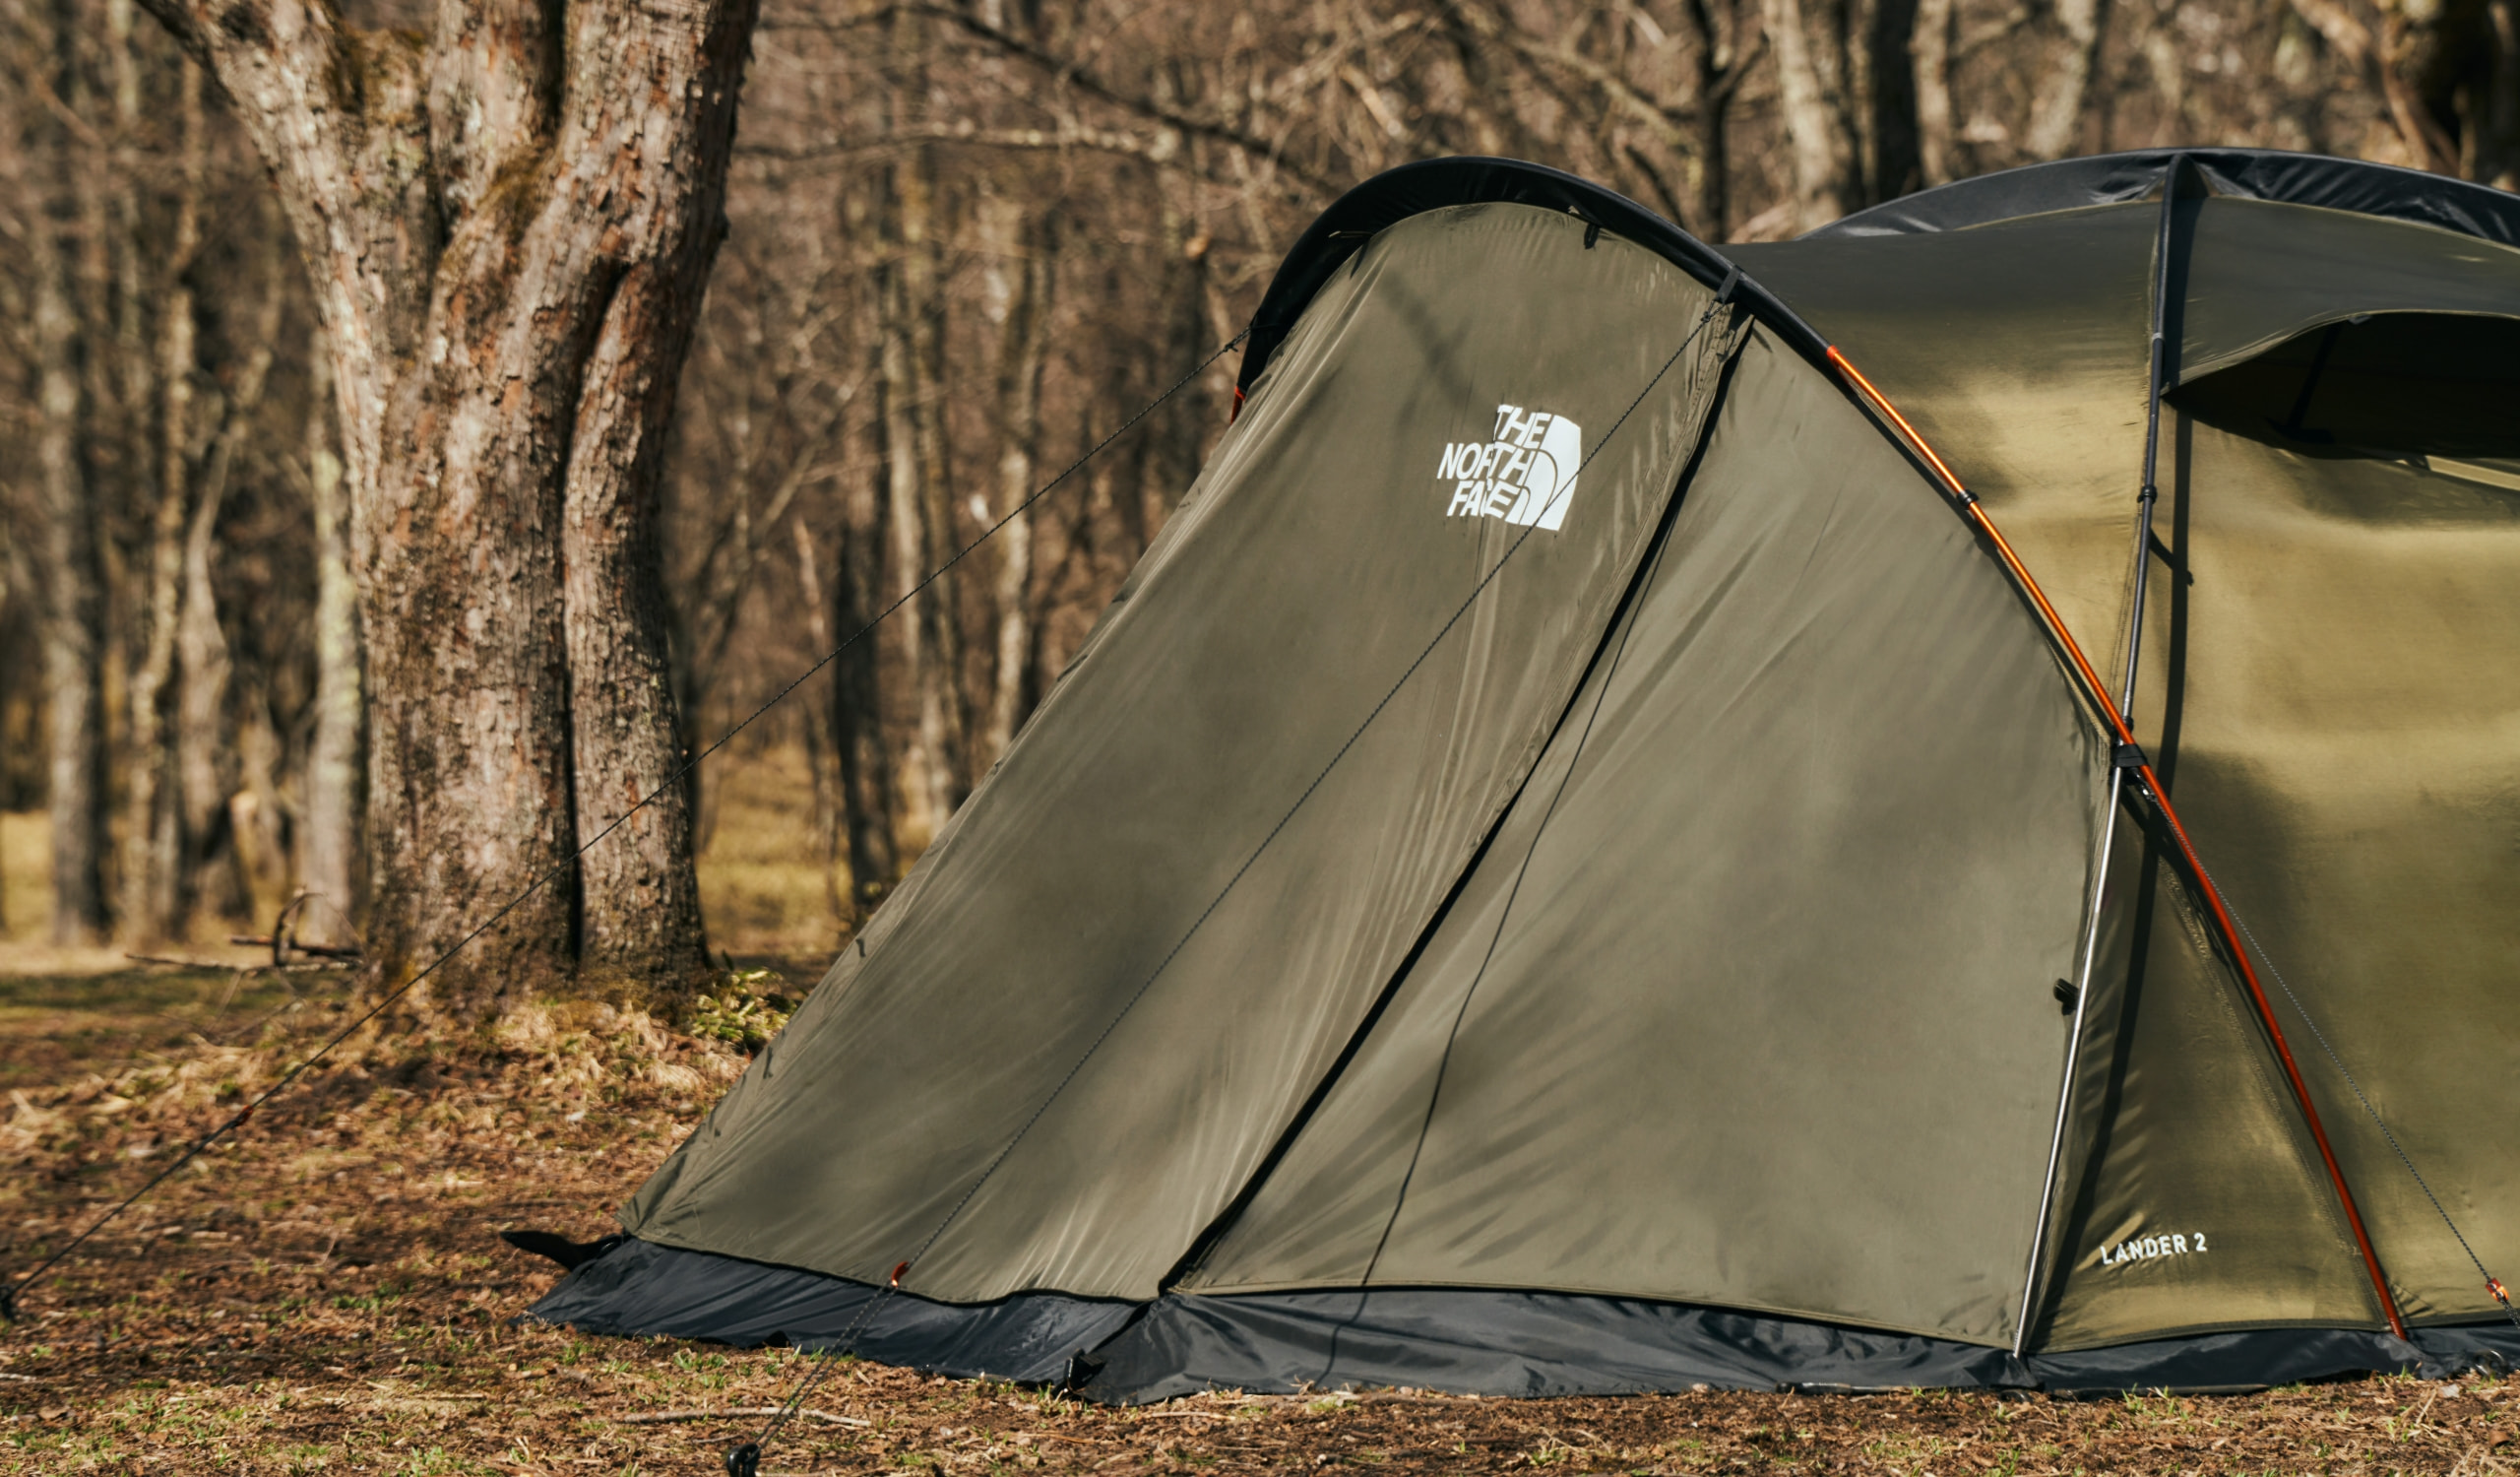 Lander 2   Online Camp Store   THE NORTH FACE CAMP